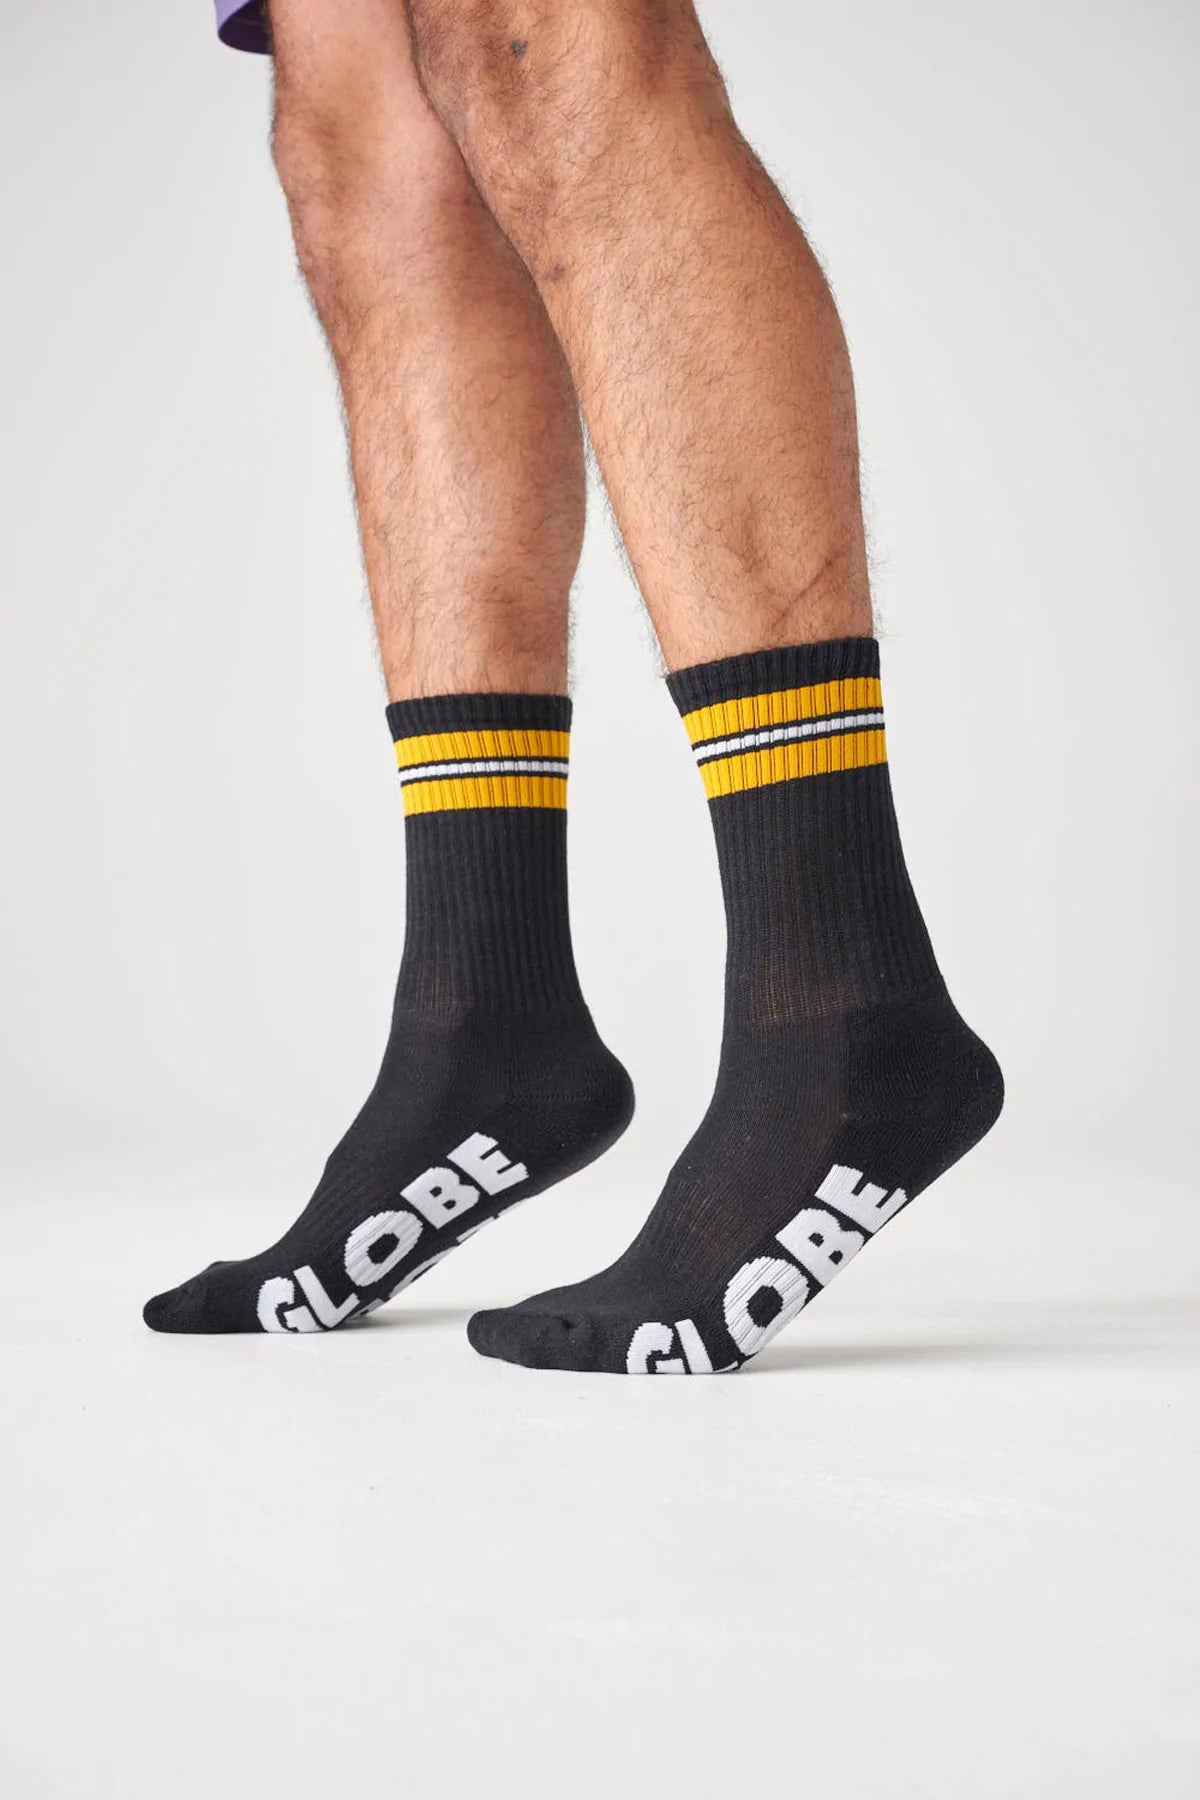 GLOBE - Off Course Organic Cotton Crew Sock 3 Pack all things being eco chilliwack - men's skate apparel